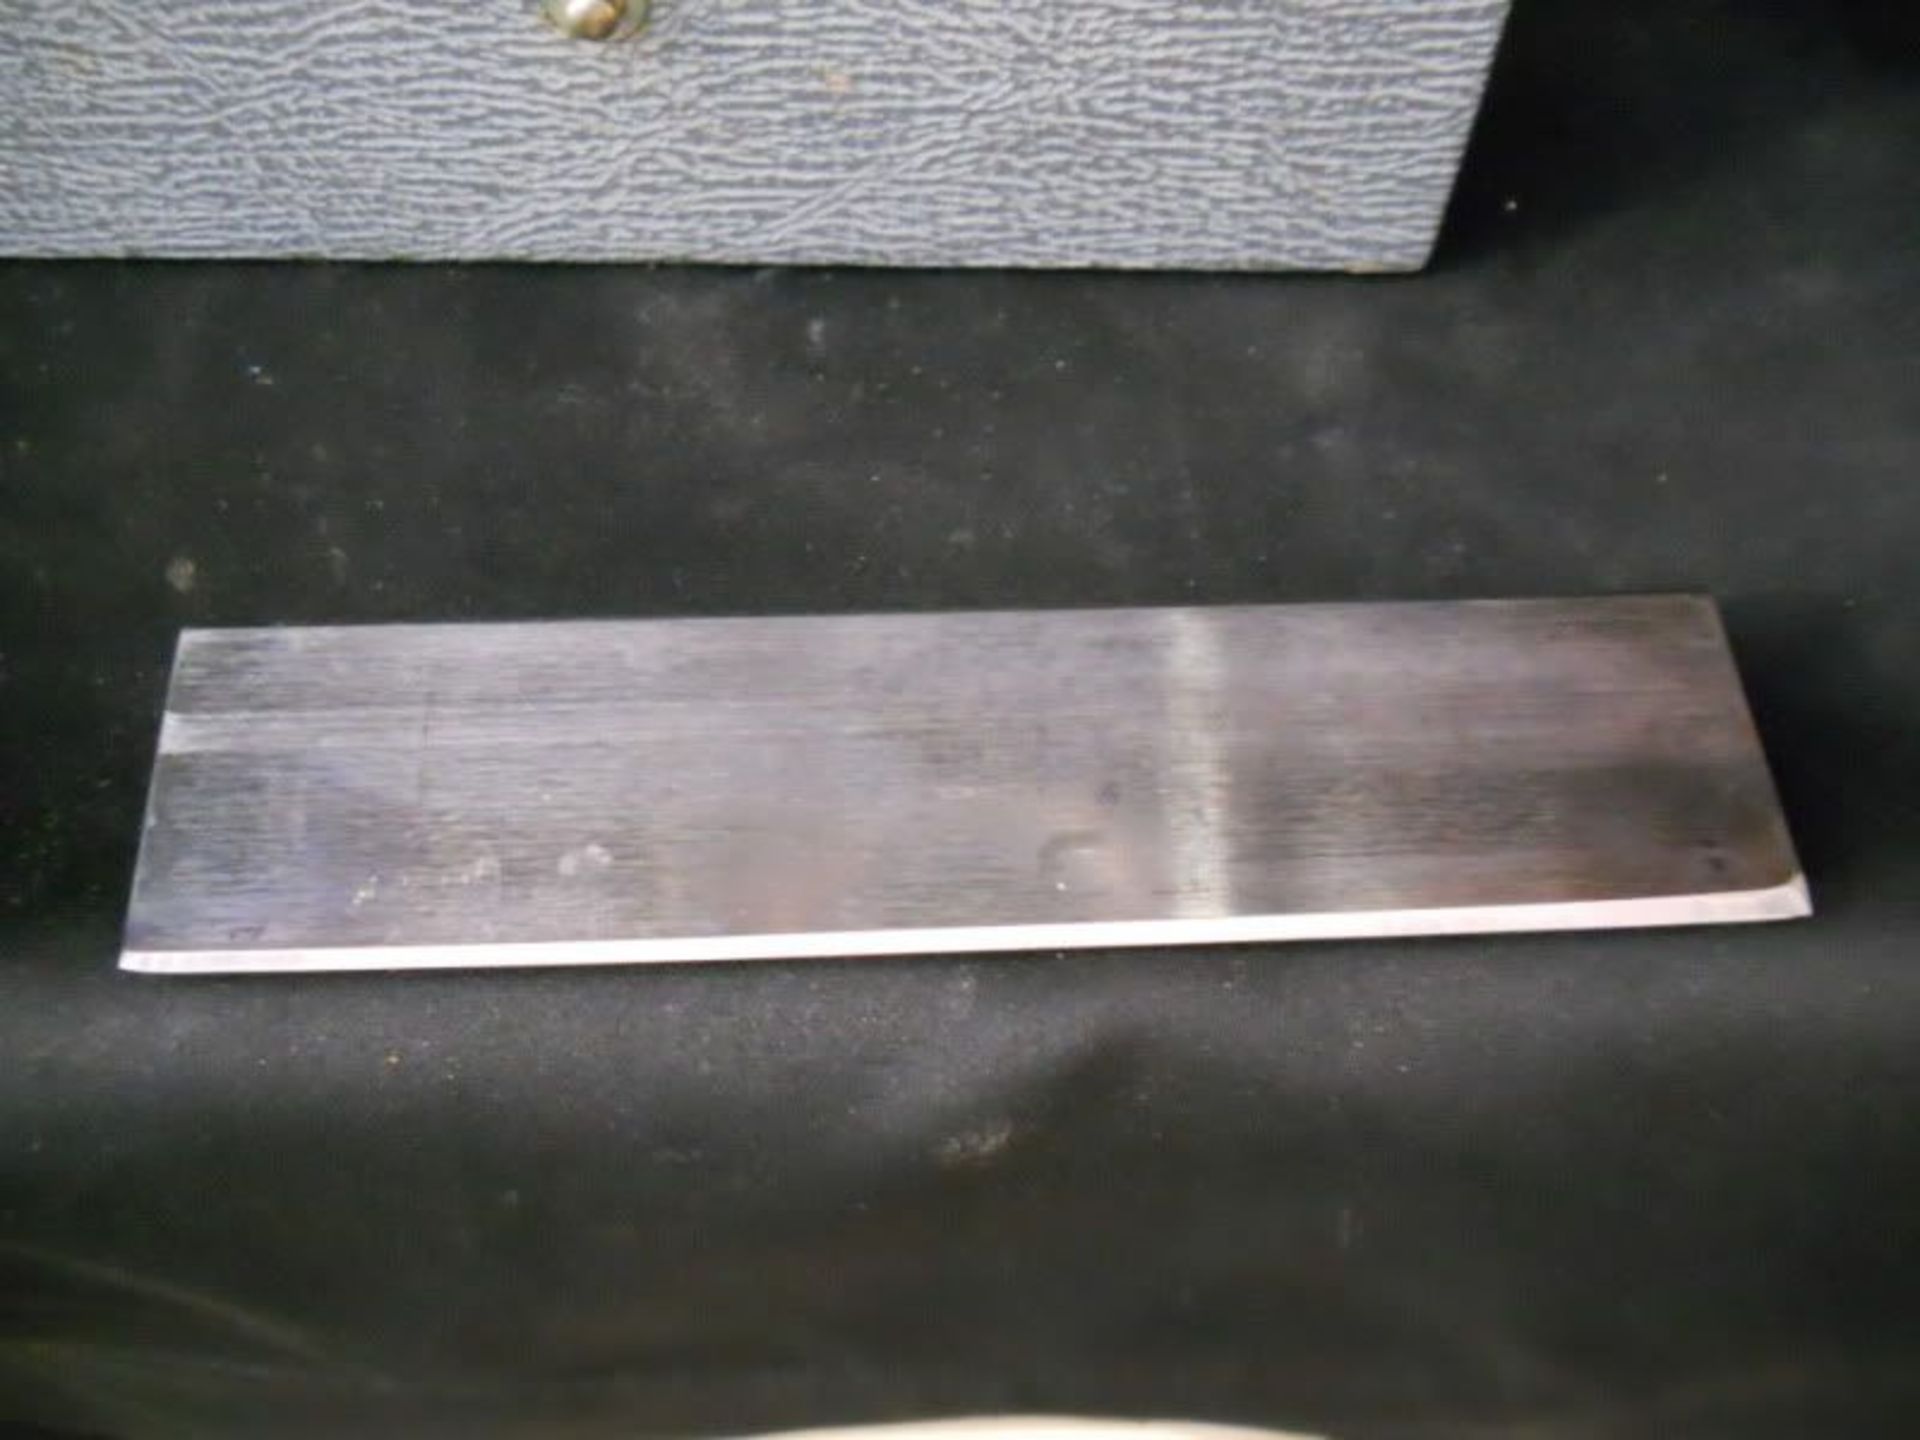 Unknown MFG. Microtome Knife Blade 120mm, Qty 1, 221080348237 - Image 3 of 5